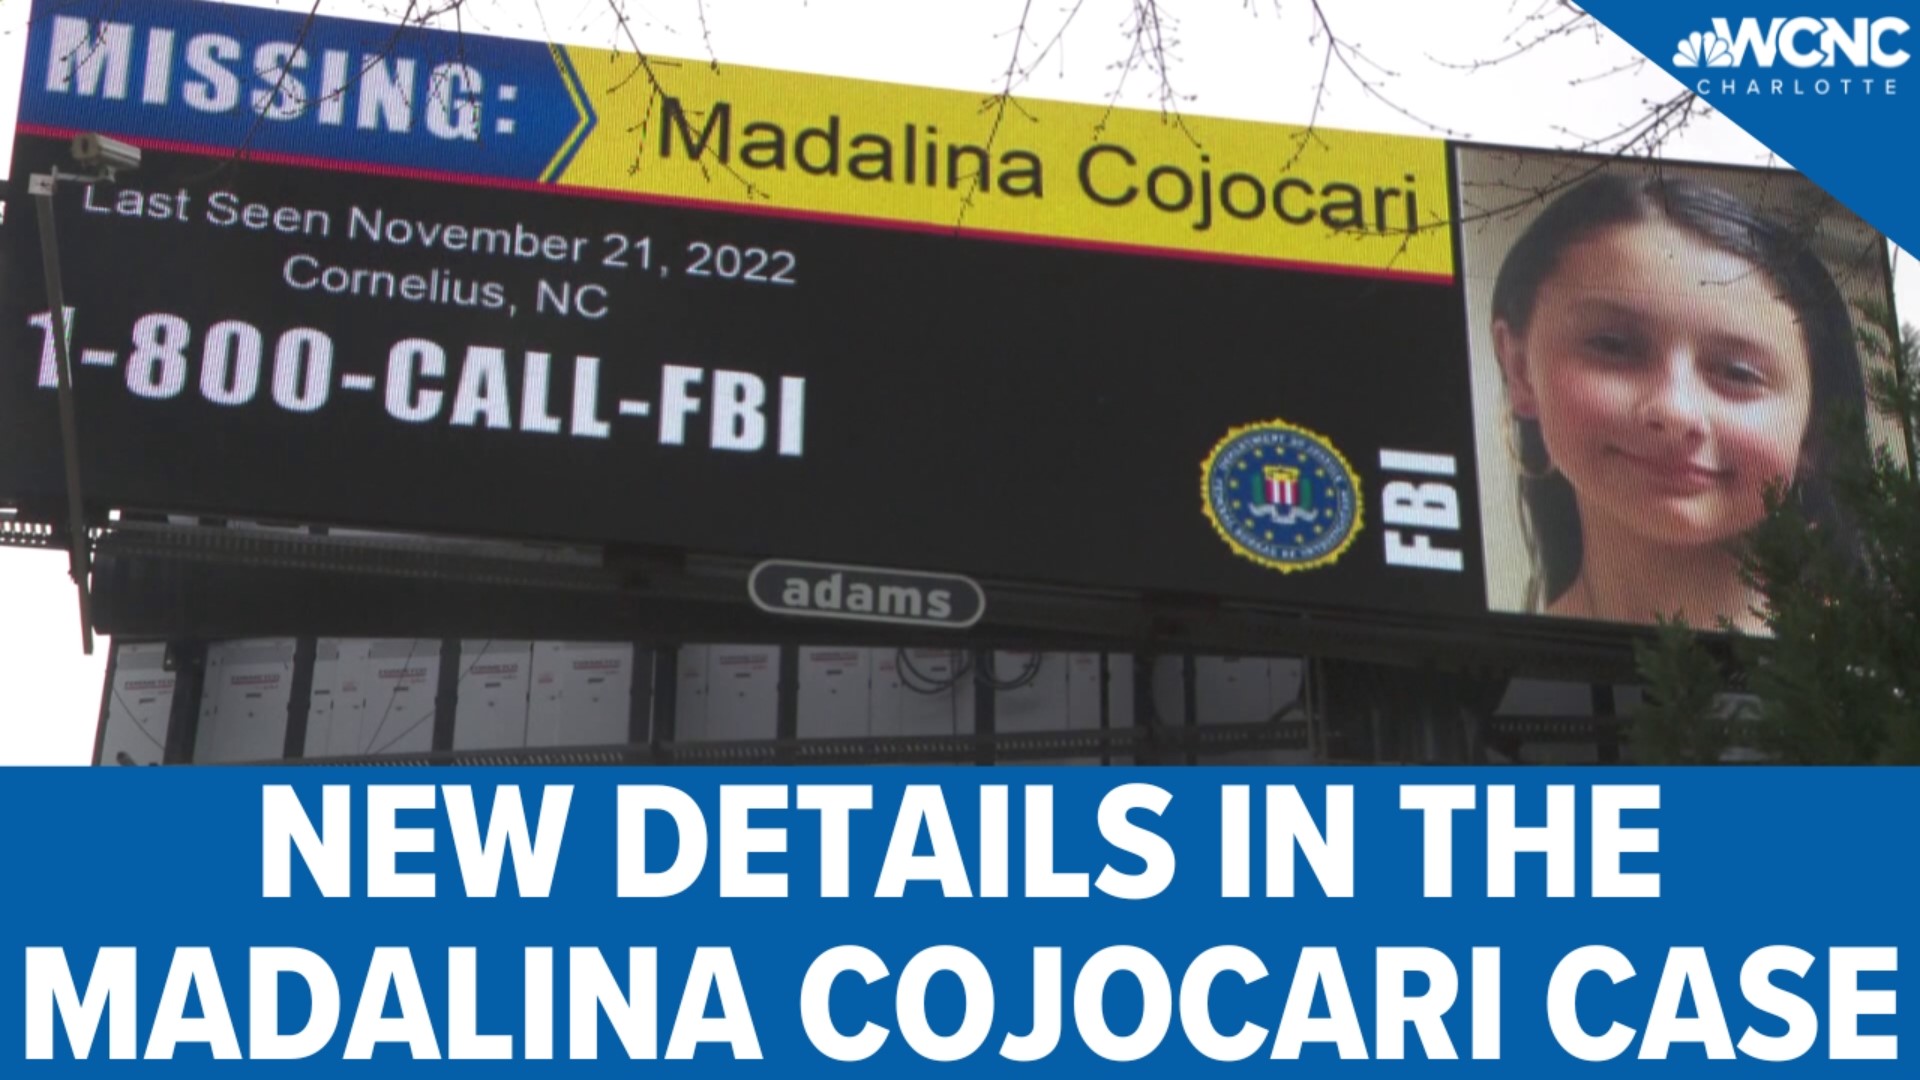 Newly obtained search warrants reveal Madalina Cojocari's mother asked a distant relative if he would help with "smuggling" her and Madalina away.